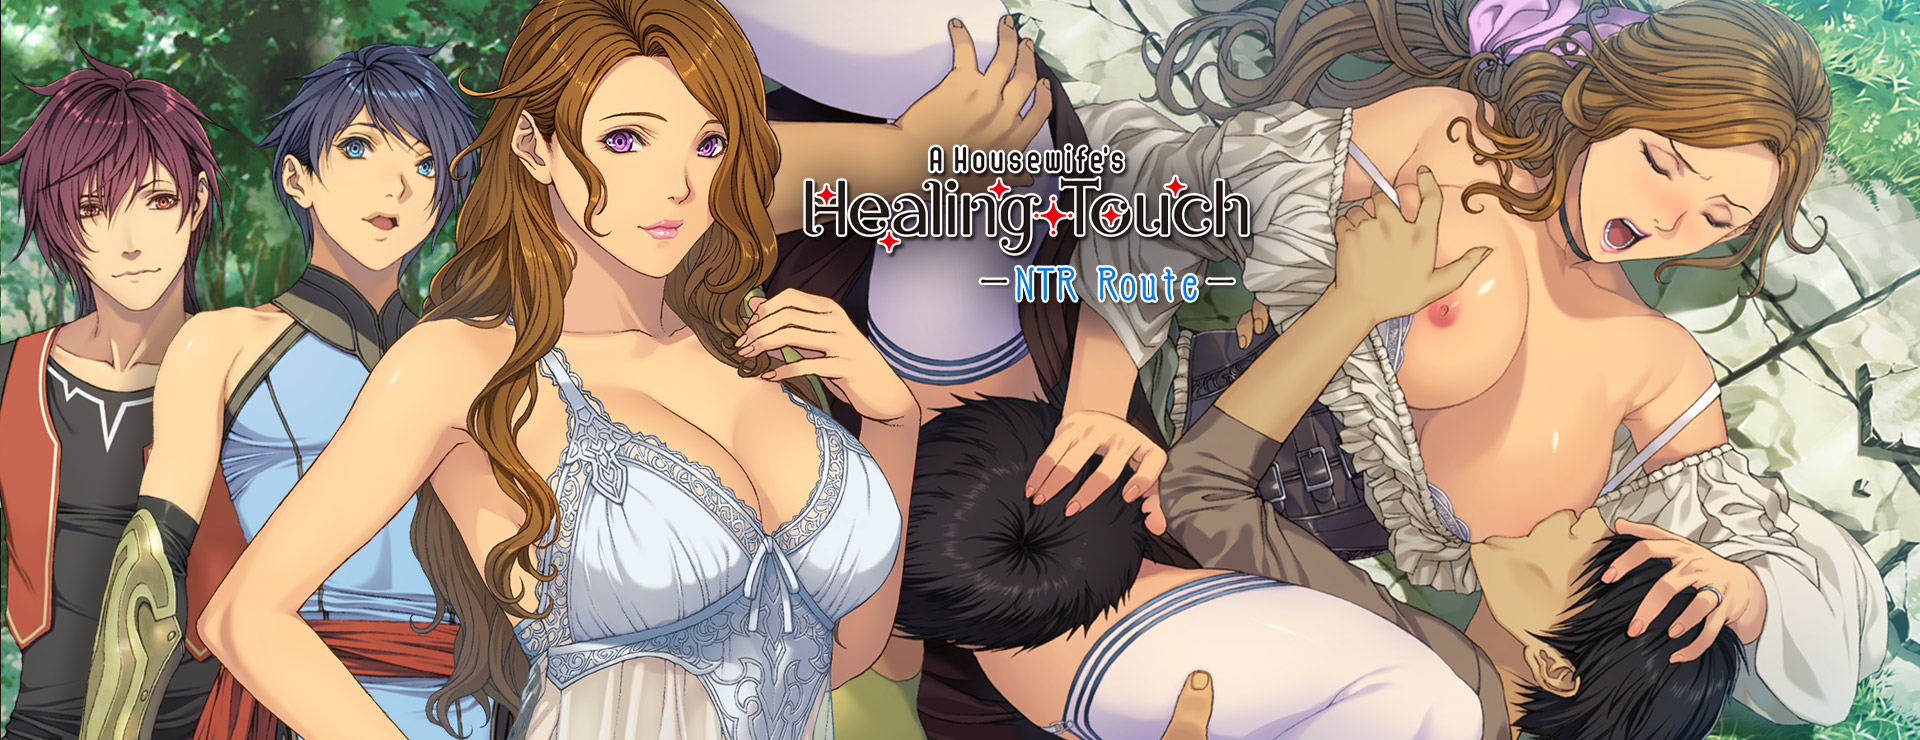 A Housewife's Healing Touch (NTR Route) - 动作冒险游戏 遊戲